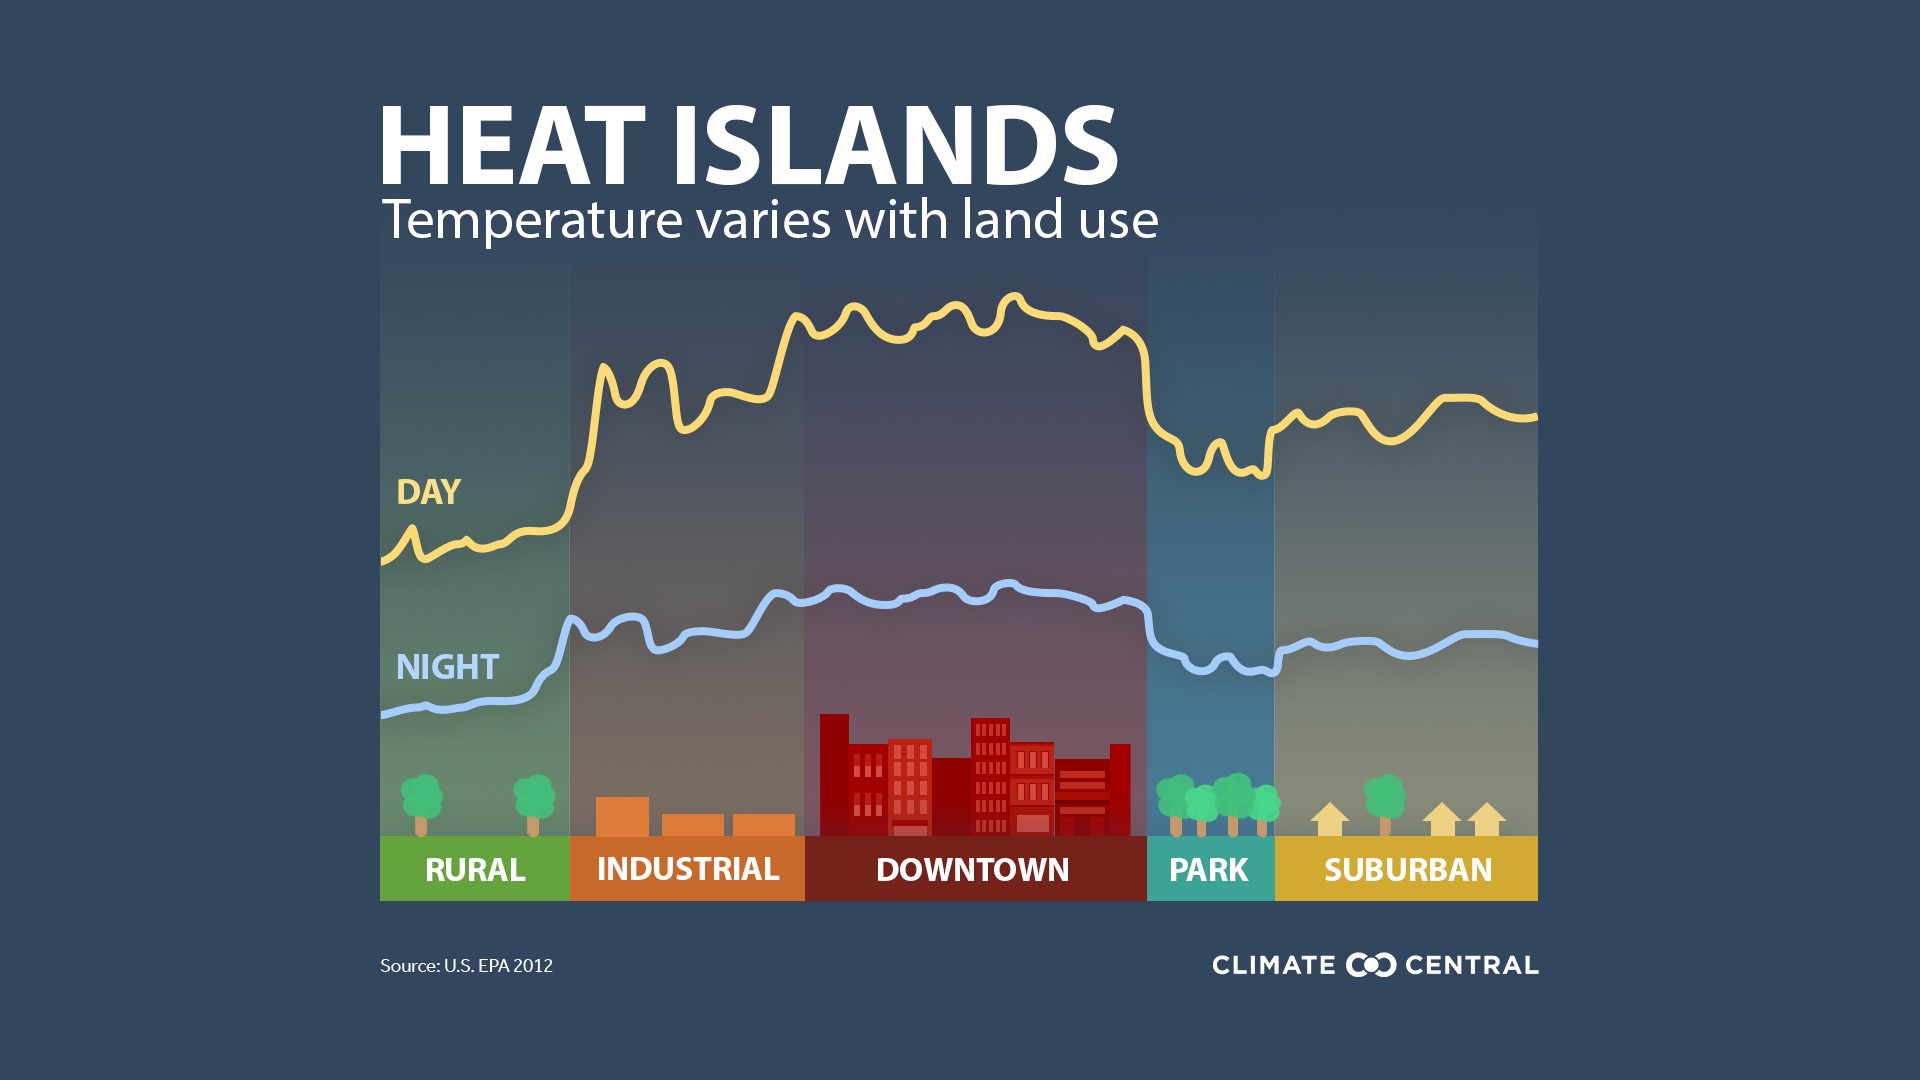 Urban heat islands are metropolitan places where buildings and pavement cause it to be hotter than their outlying areas.